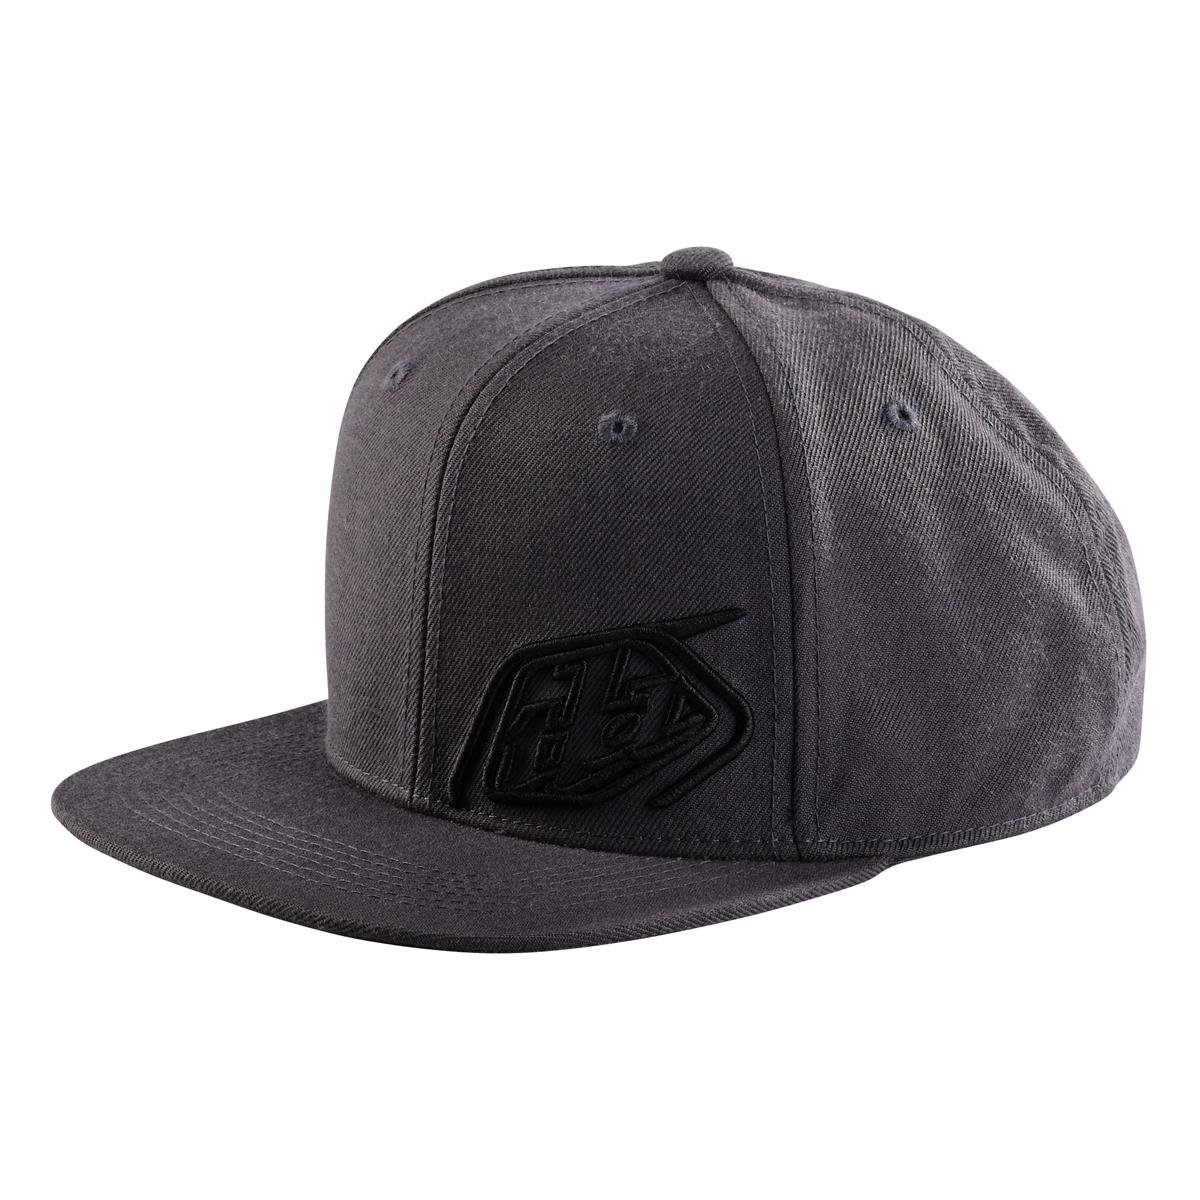 Troy Lee Designs 9Fifty Casquette Snap Back Slice Dark Gray/Charcoal